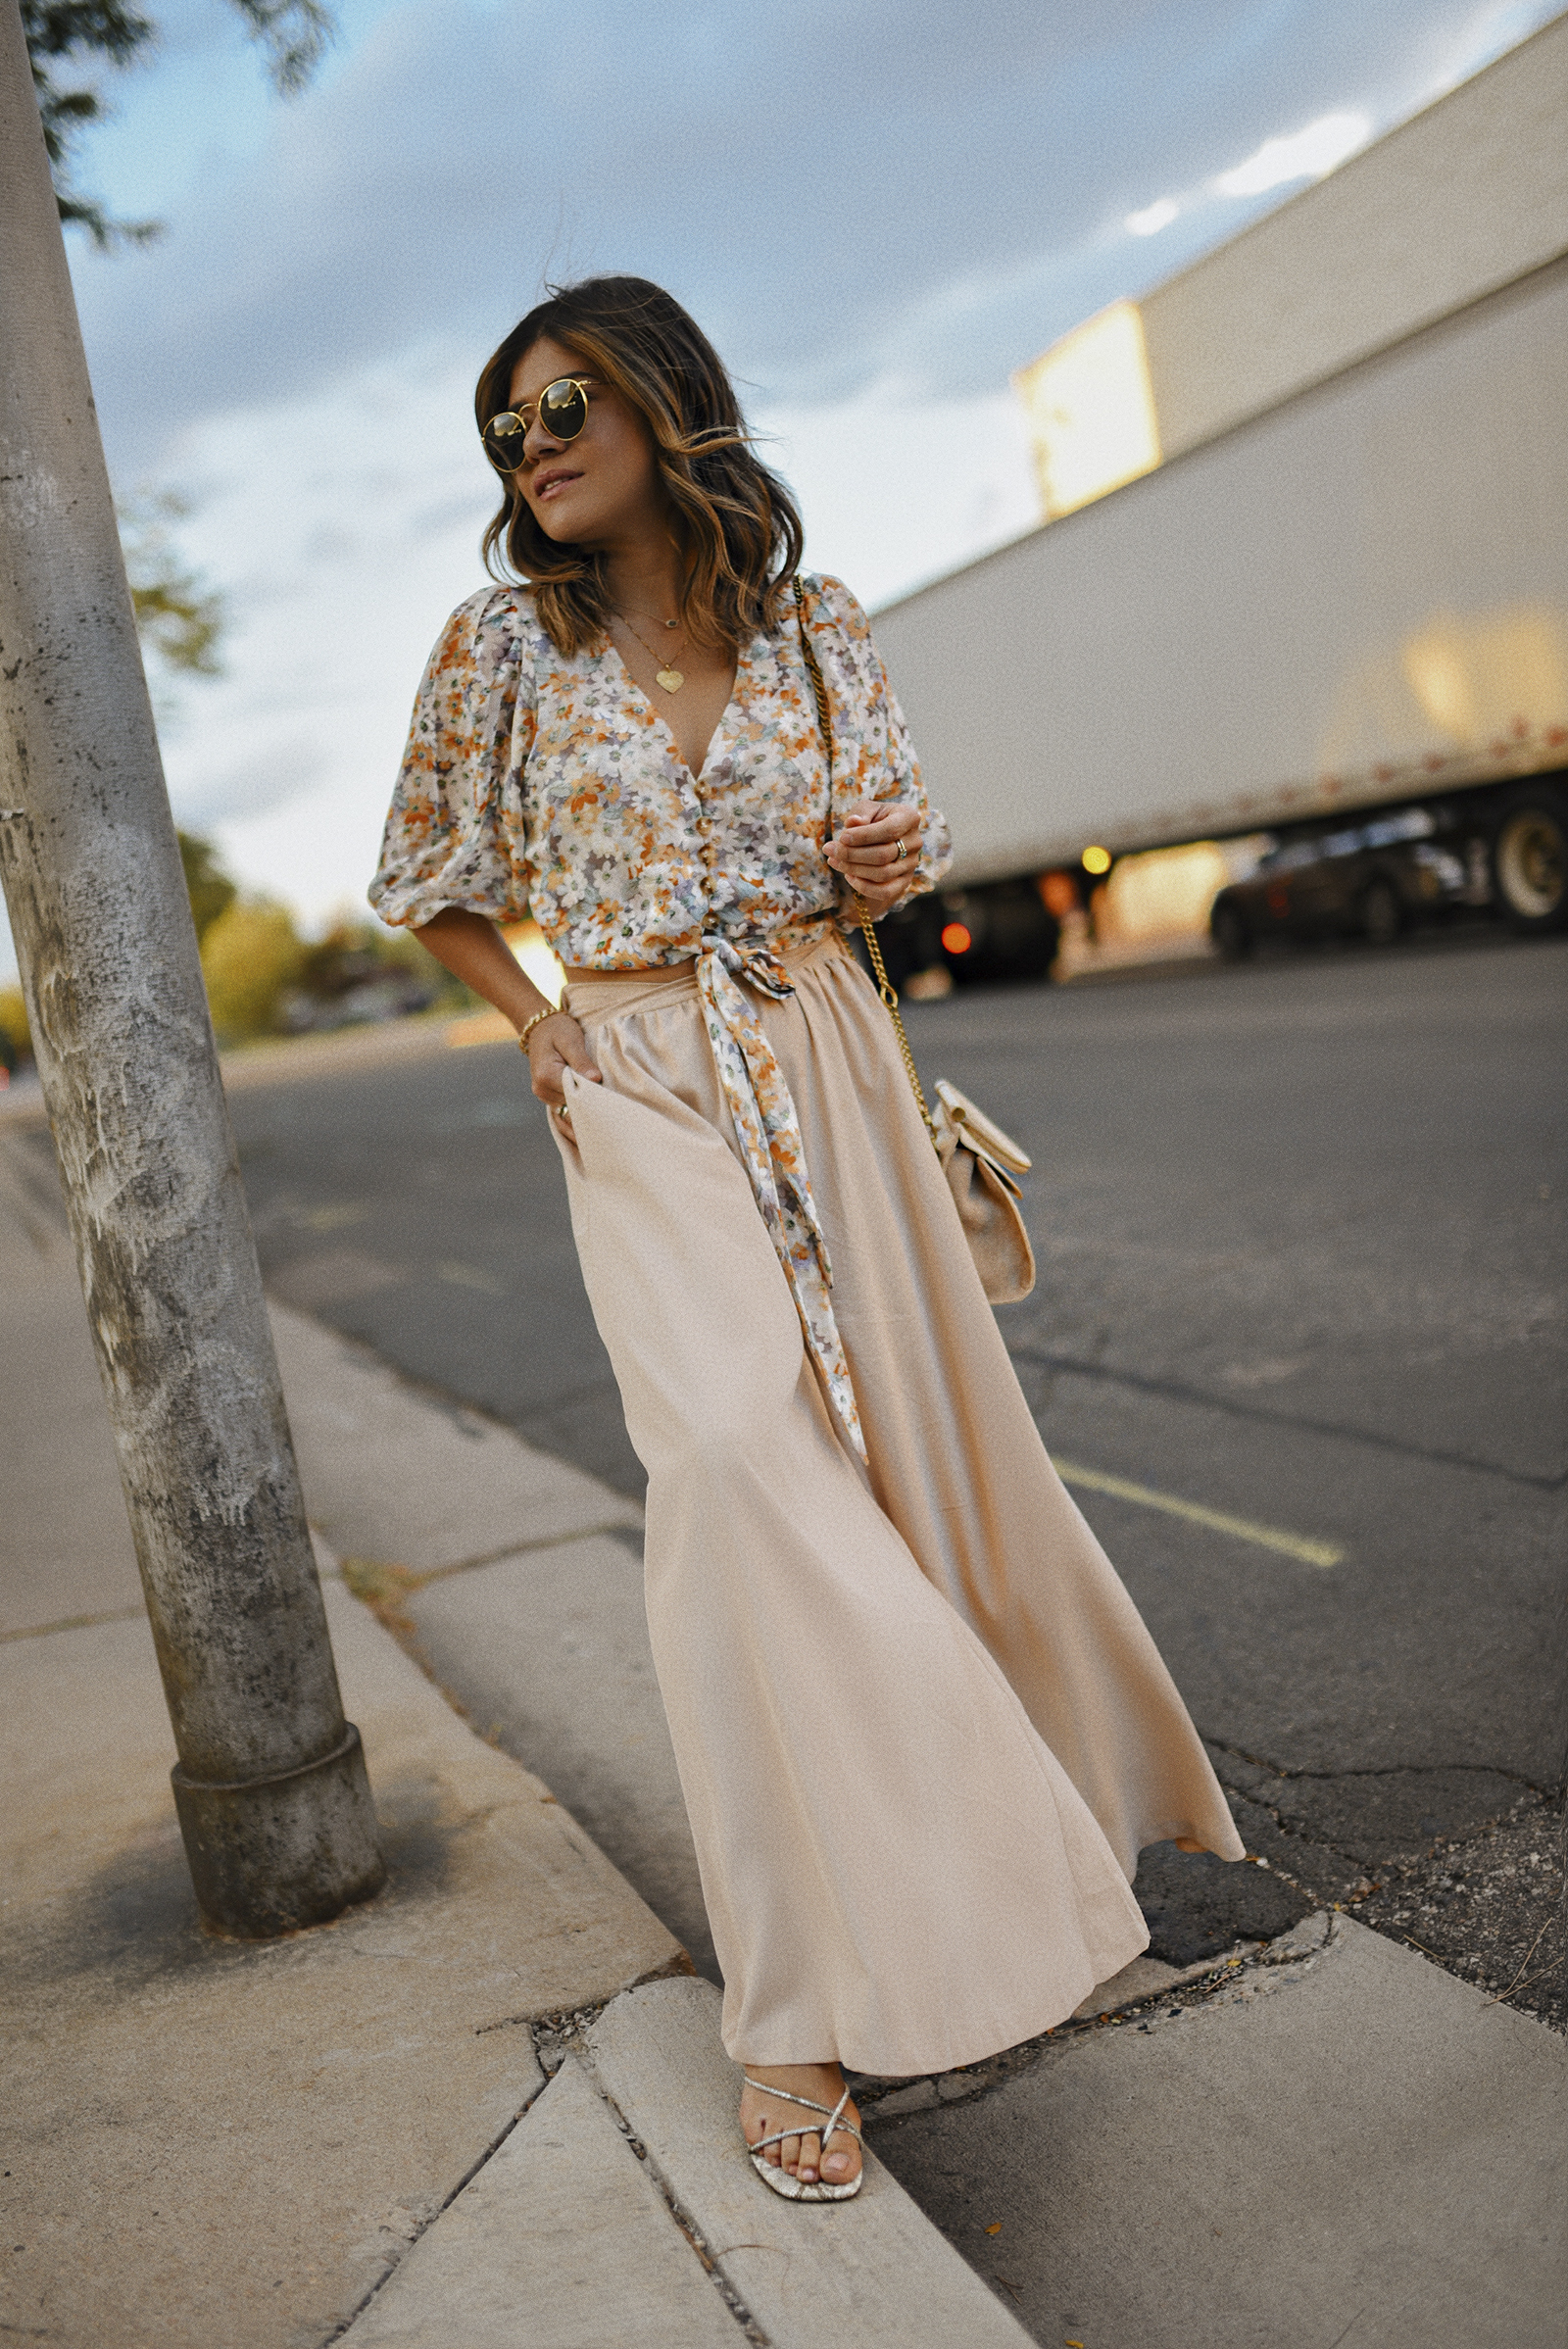 Carolina Hellal of Chic Talk wearing a Chicwish Floral front tie top, nude wide leg pants, Rayban sunglasses, Urban Outfitters sandals and Nat & Nin beige crosssbody bag.